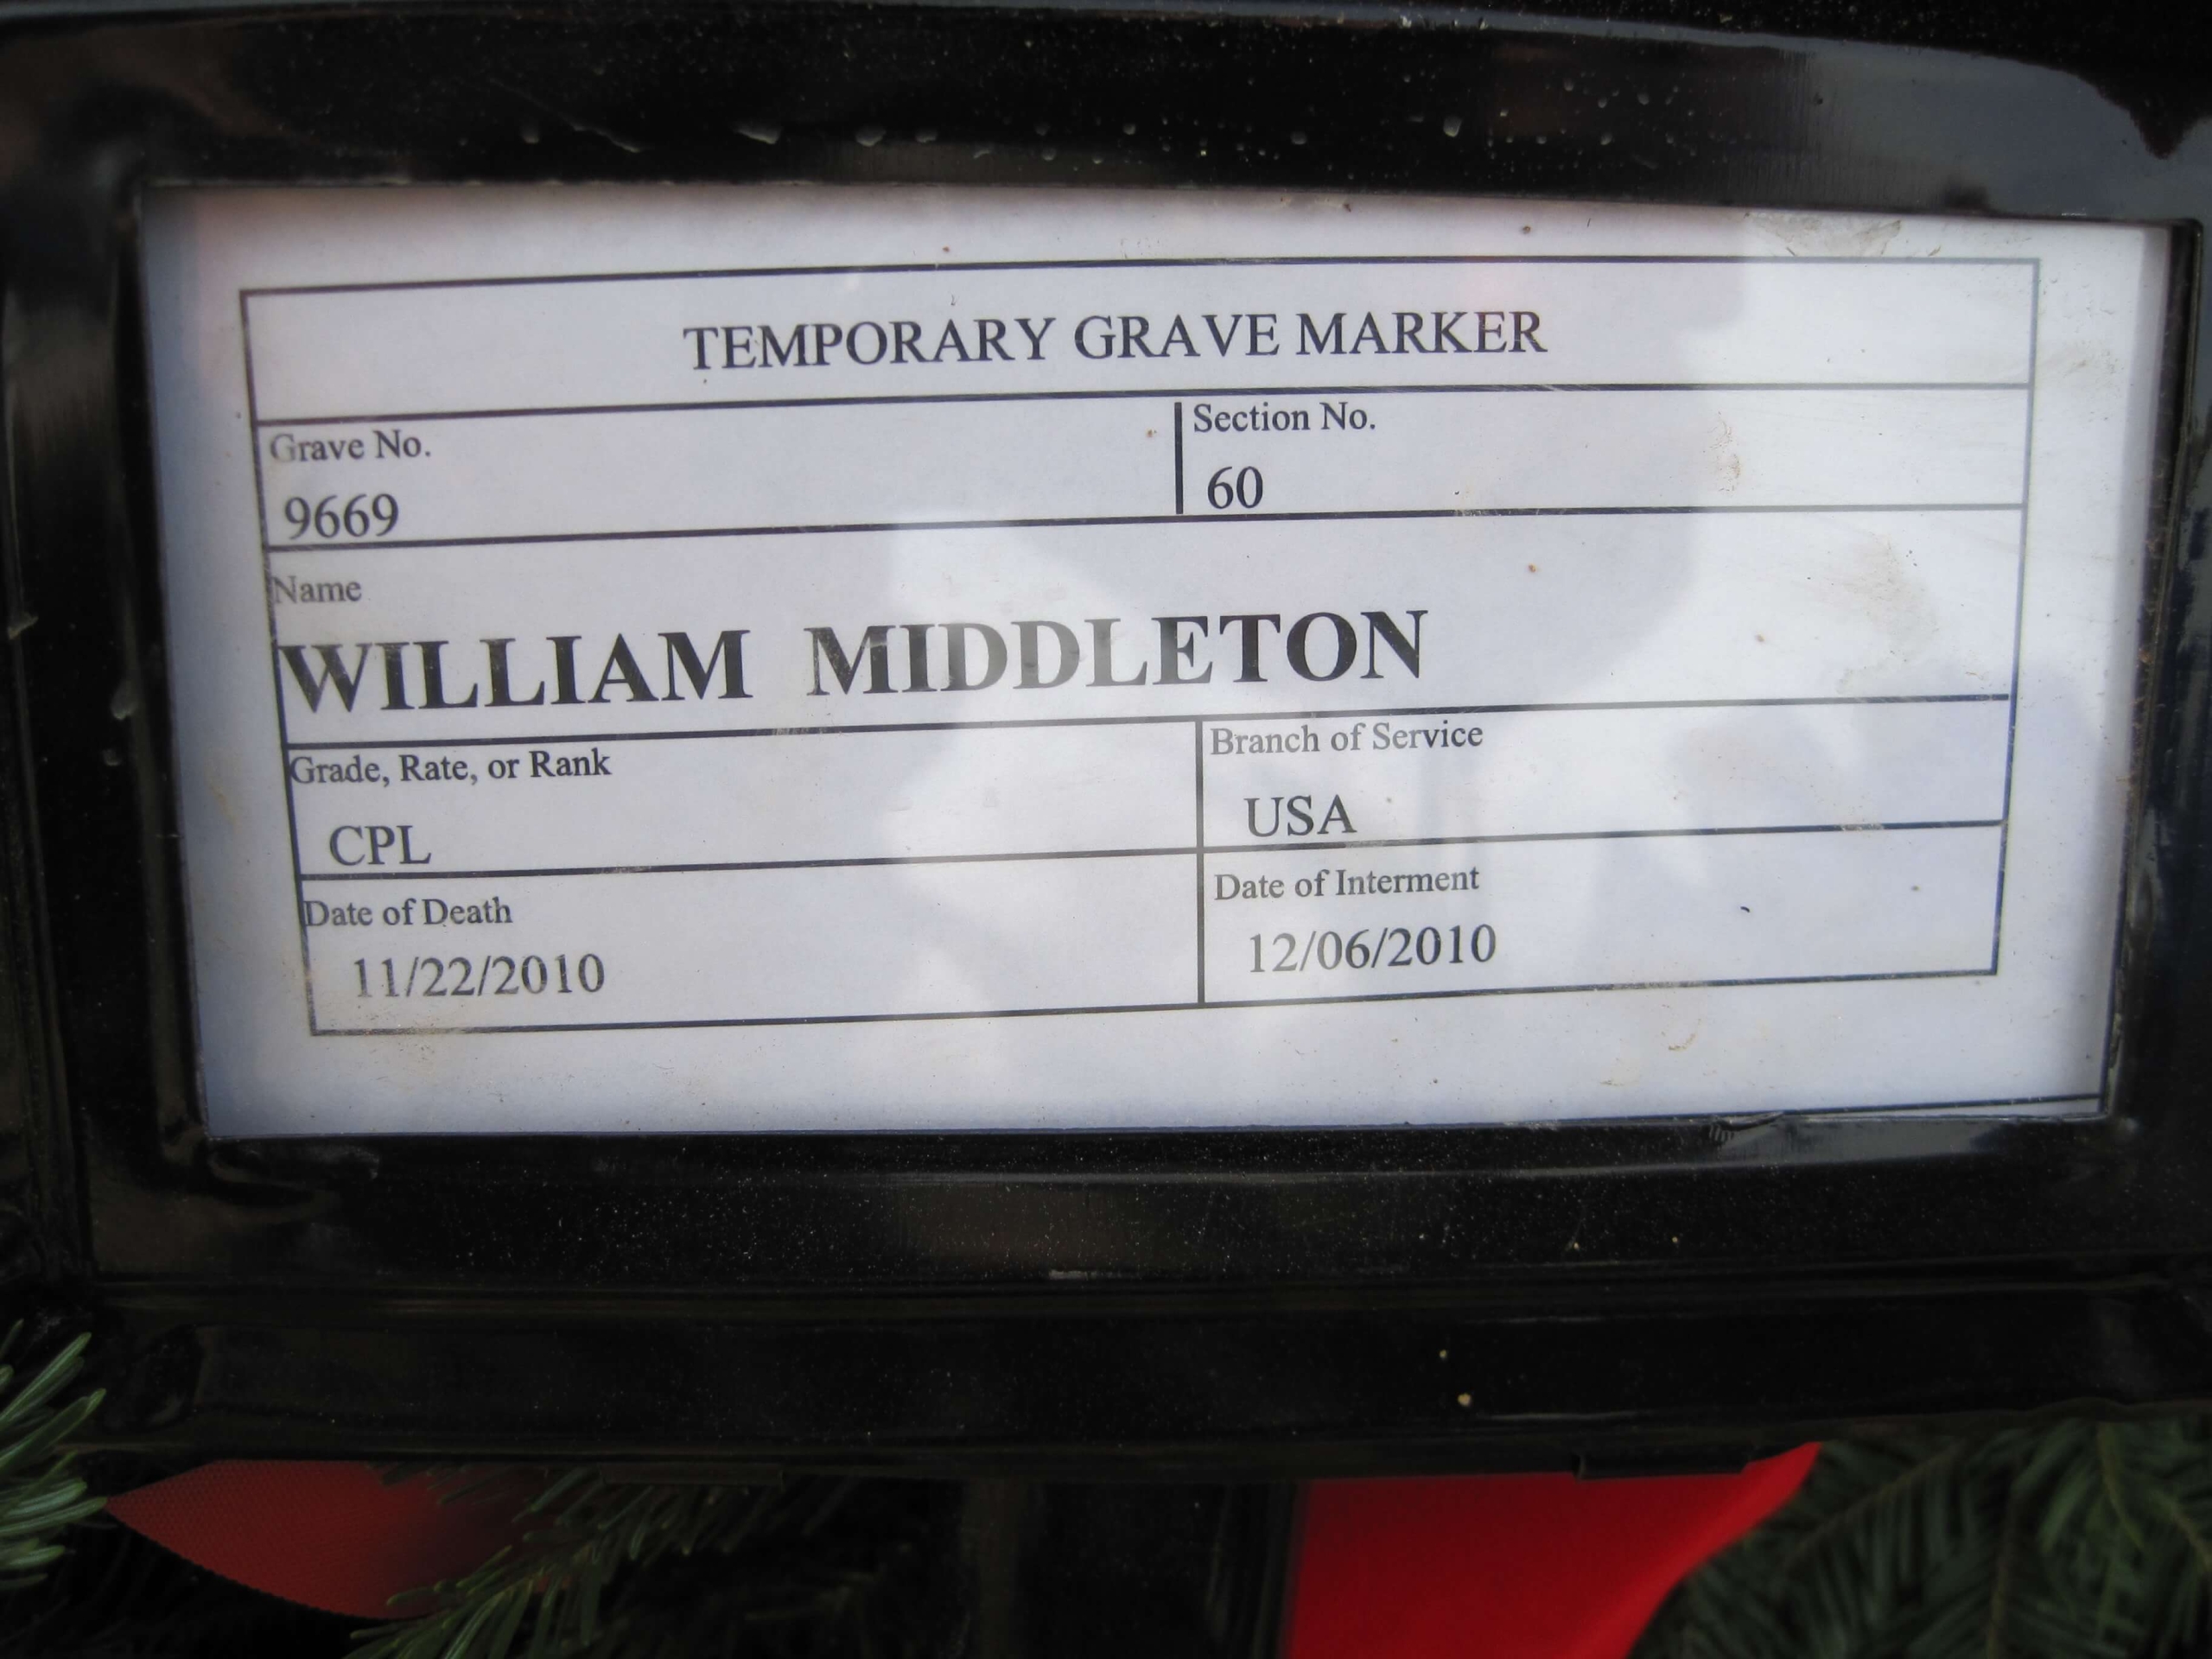 william-middleton-gravesite-photo-by-eileen-horan-january-2011-002